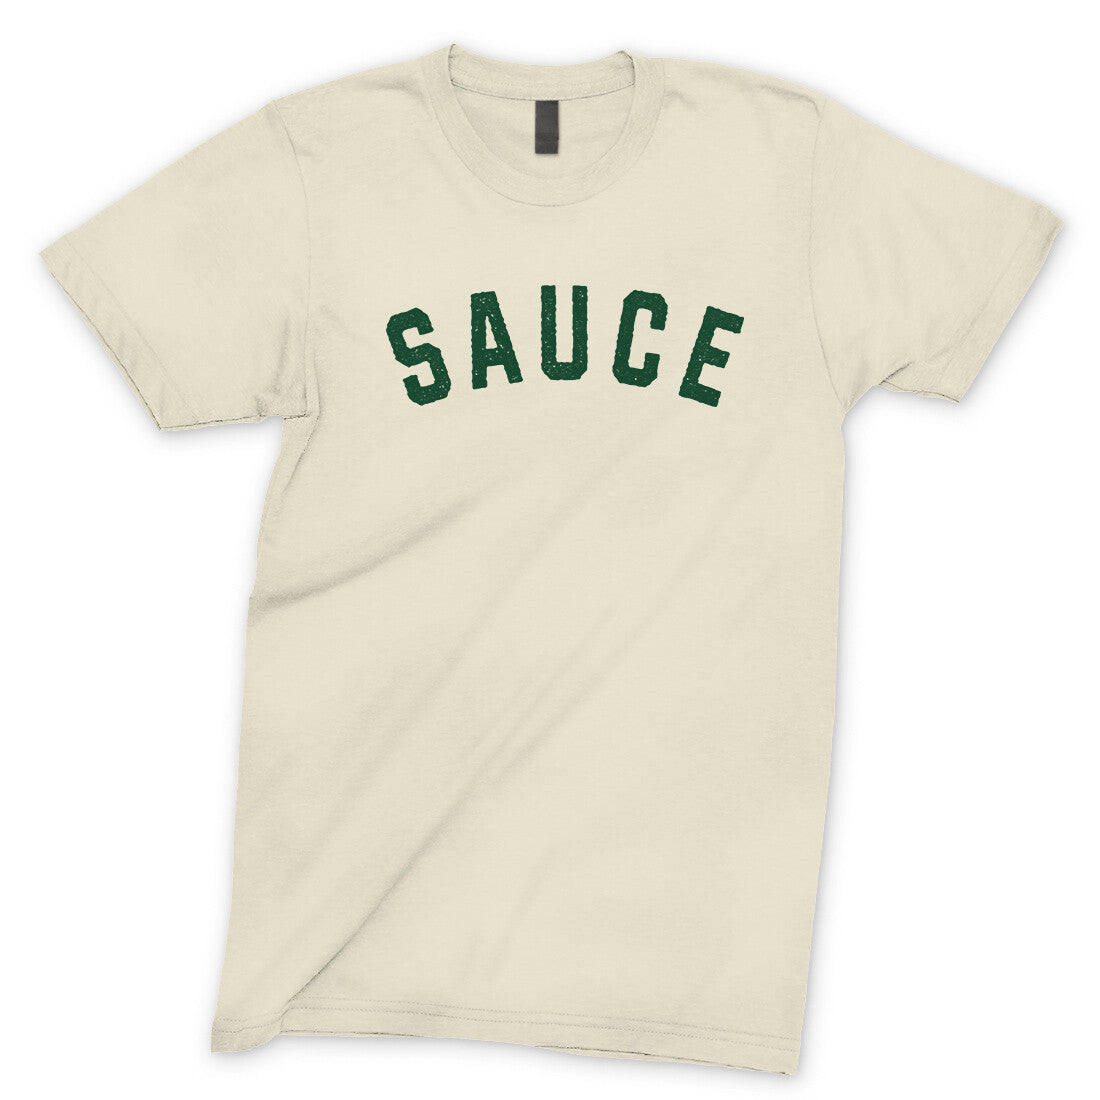 Sauce in Natural Color